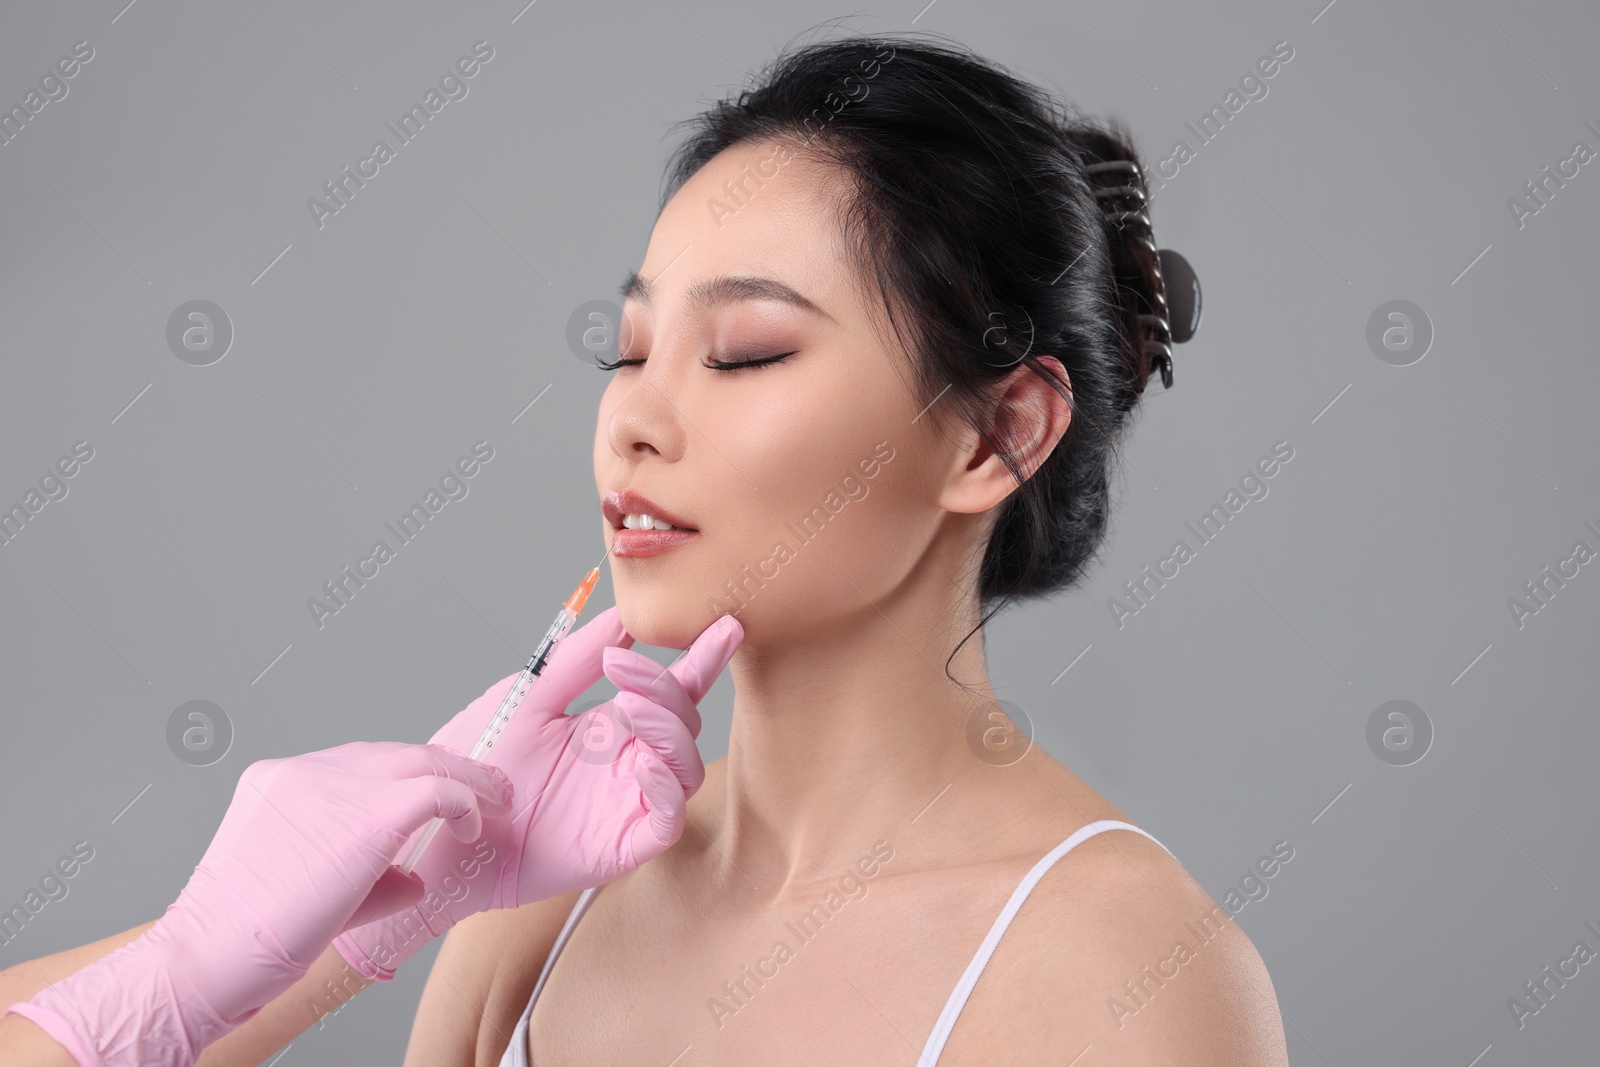 Photo of Woman getting lip injection on grey background